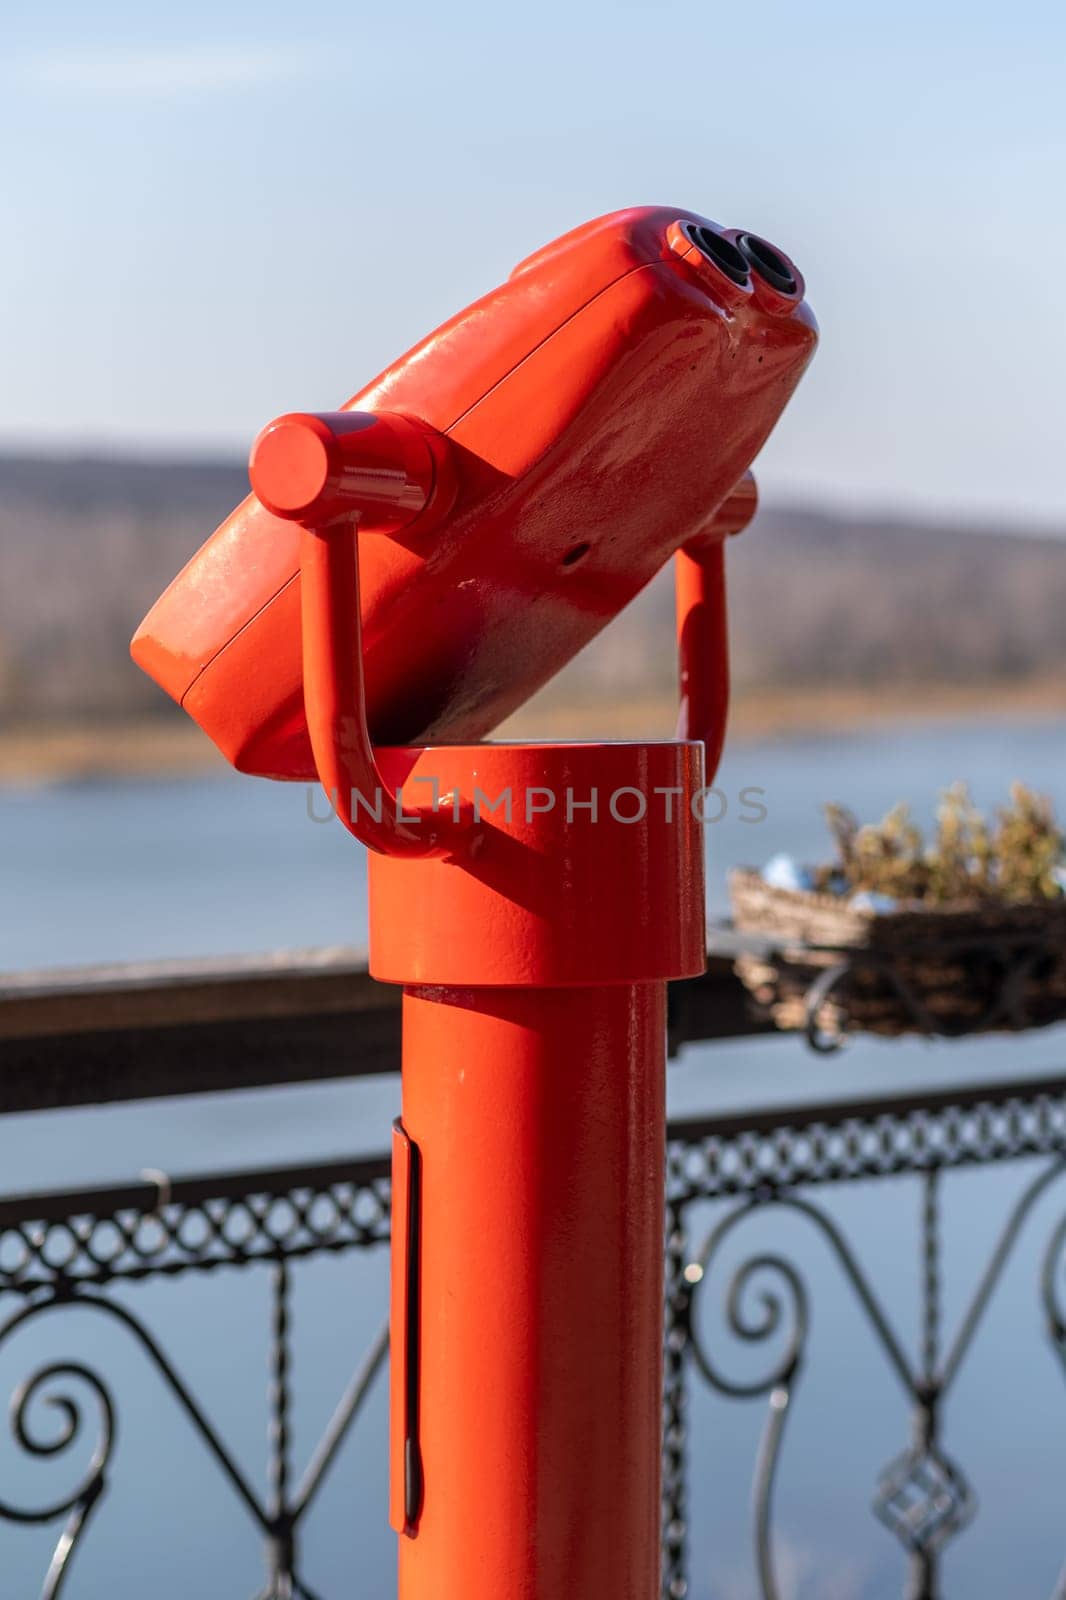 Public stationary binoculars on the banks of the river in summer or autumn to look at nature, coin-operated red metal binoculars.